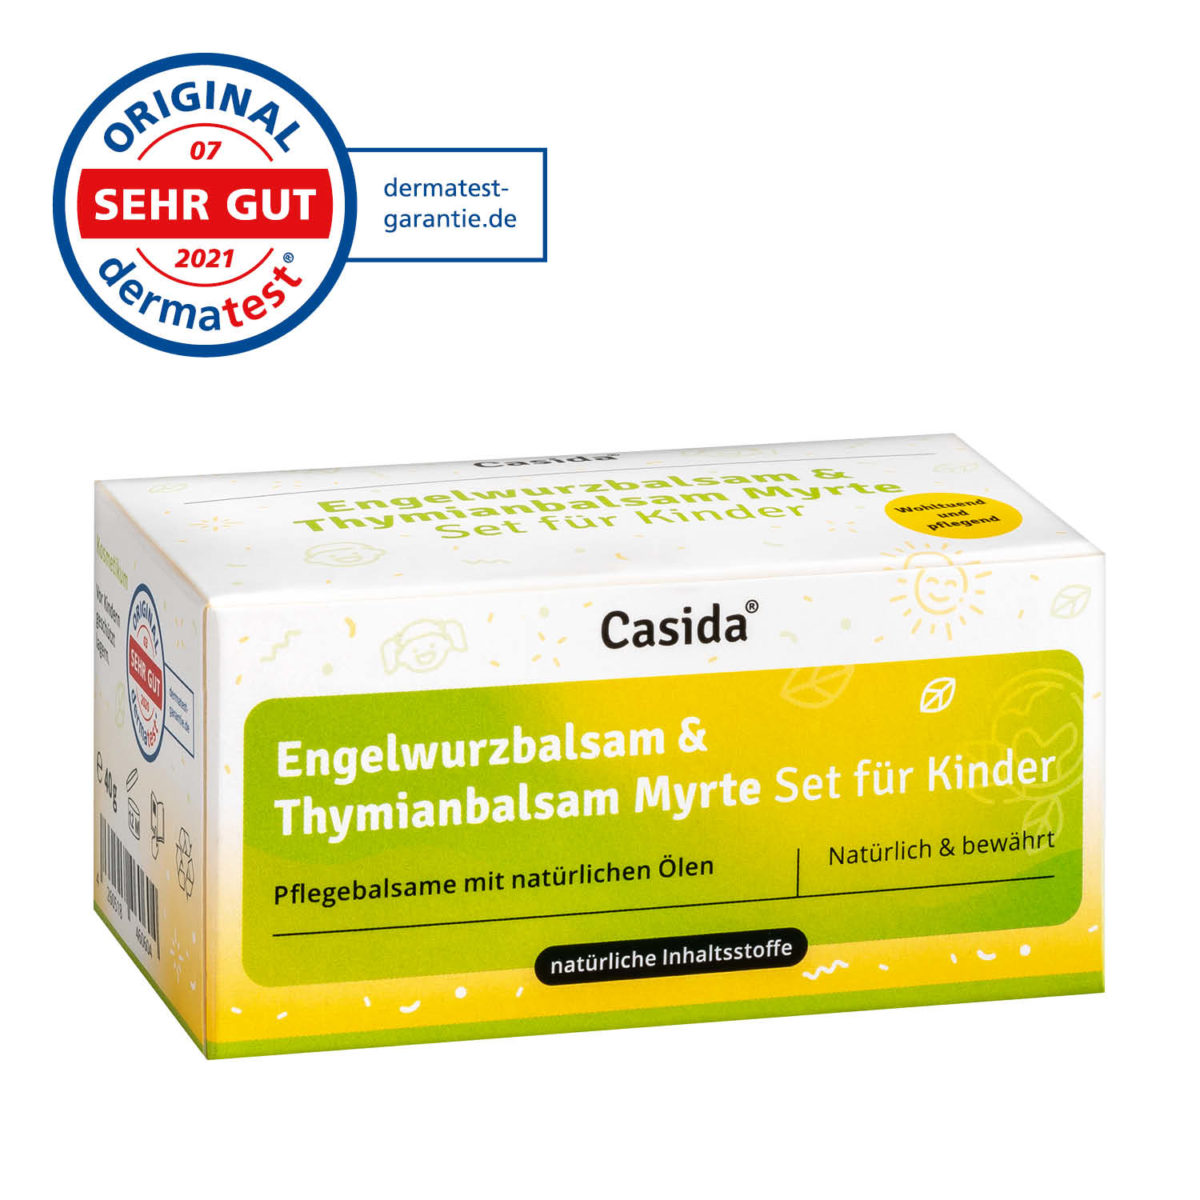 Casida Product Combo Angelica Balm and Thyme Balm for Children 10209008 10086729 PZN Apotheke Erkältung Baby pflanzlich behandeln10